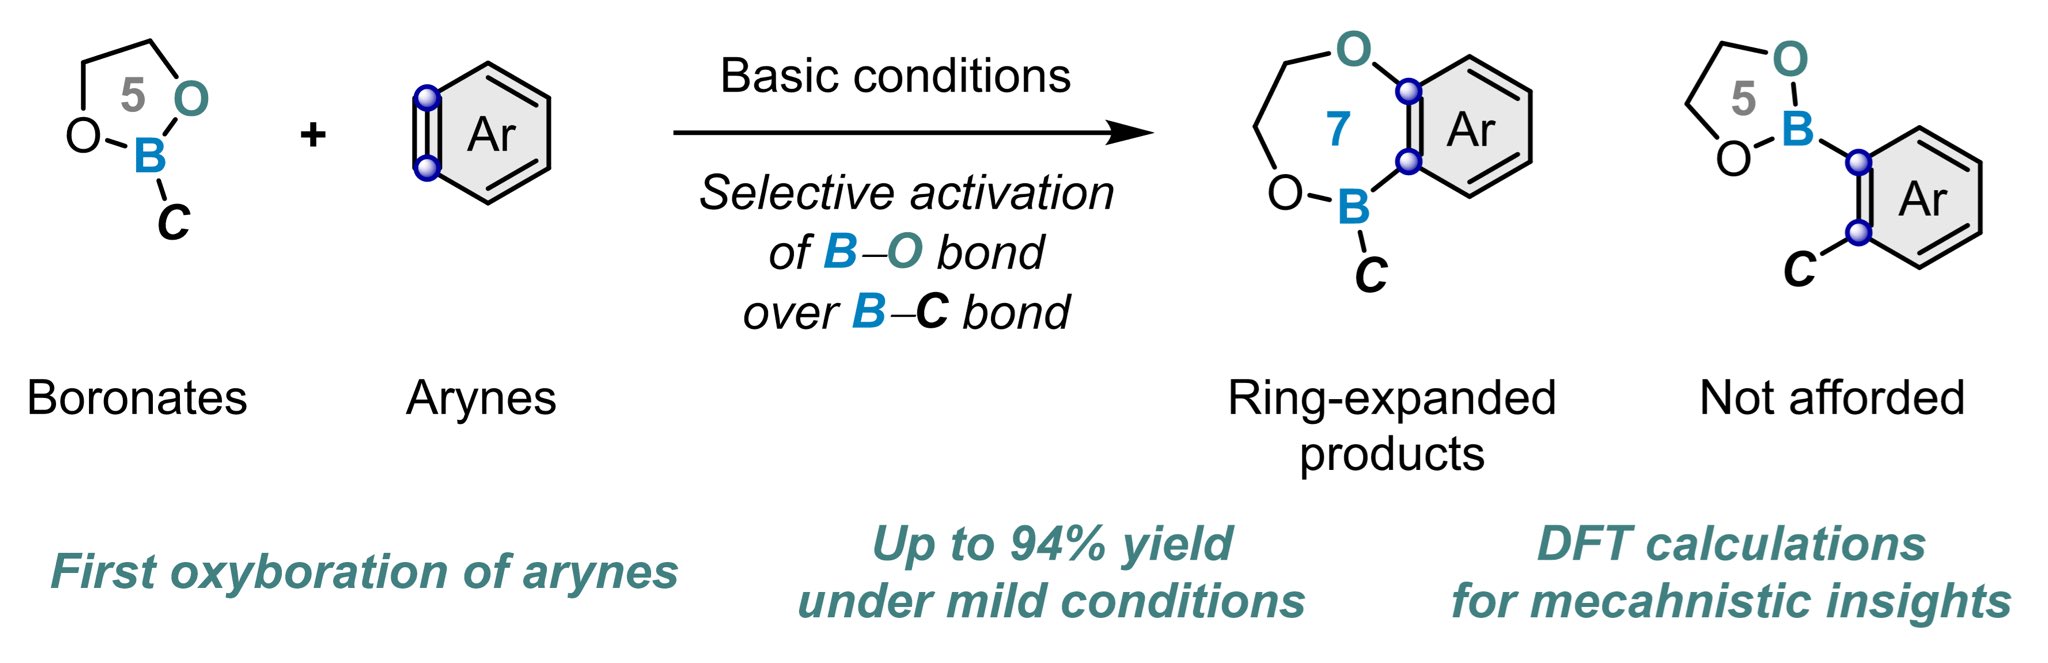 Dual Roles of Co2(CO)8 Enable Carbonylative Ring Expansion of Thieta